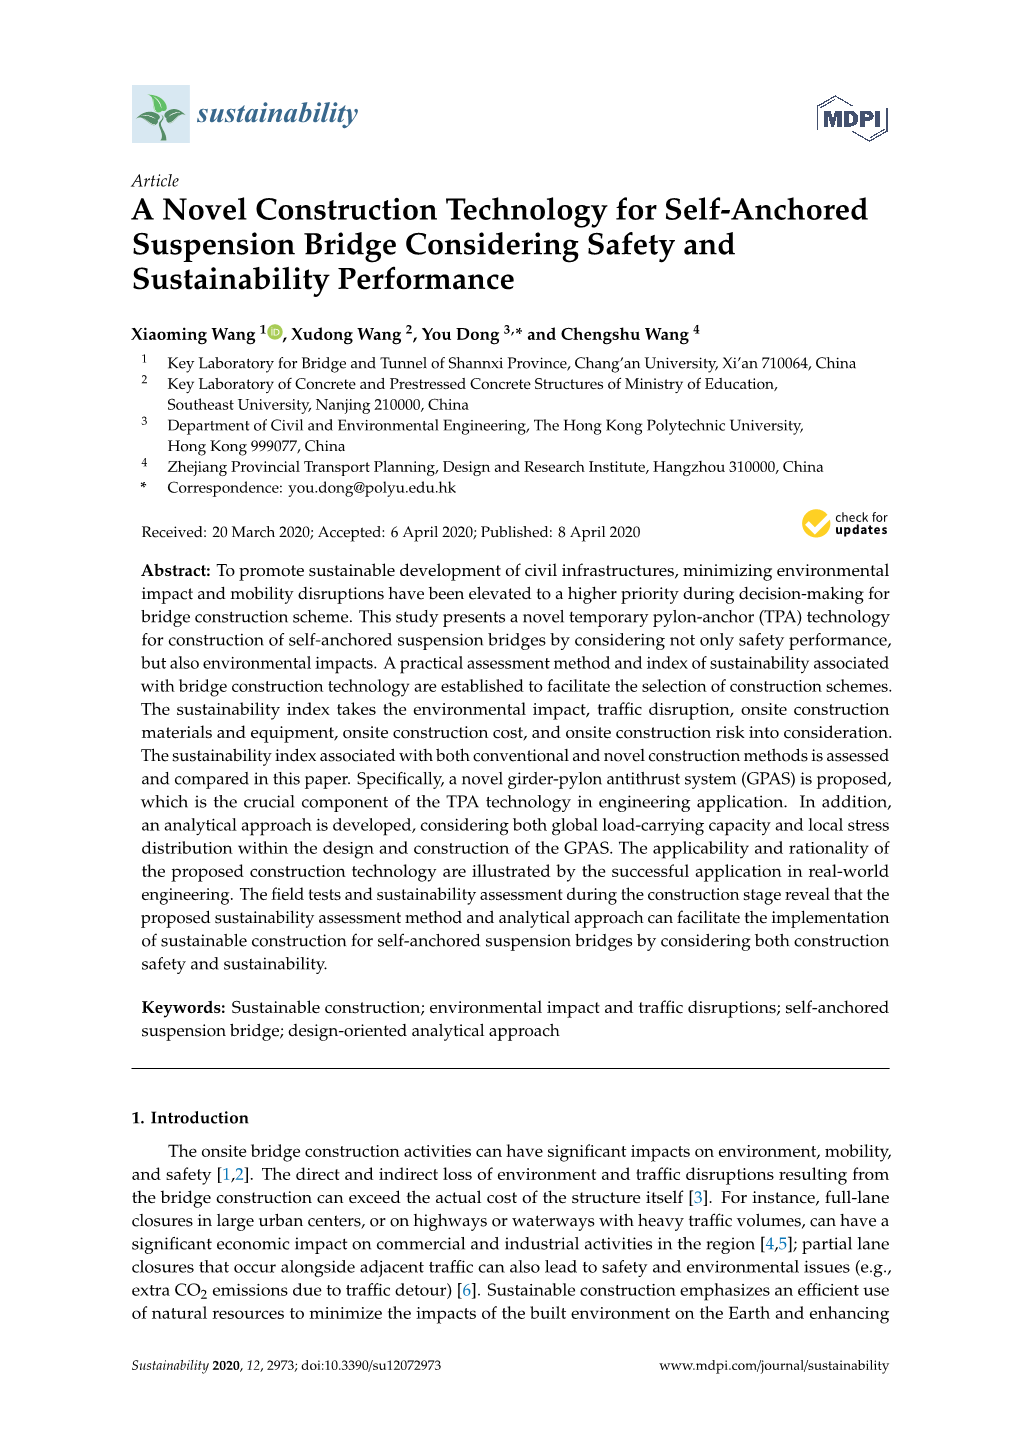 A Novel Construction Technology for Self-Anchored Suspension Bridge Considering Safety and Sustainability Performance